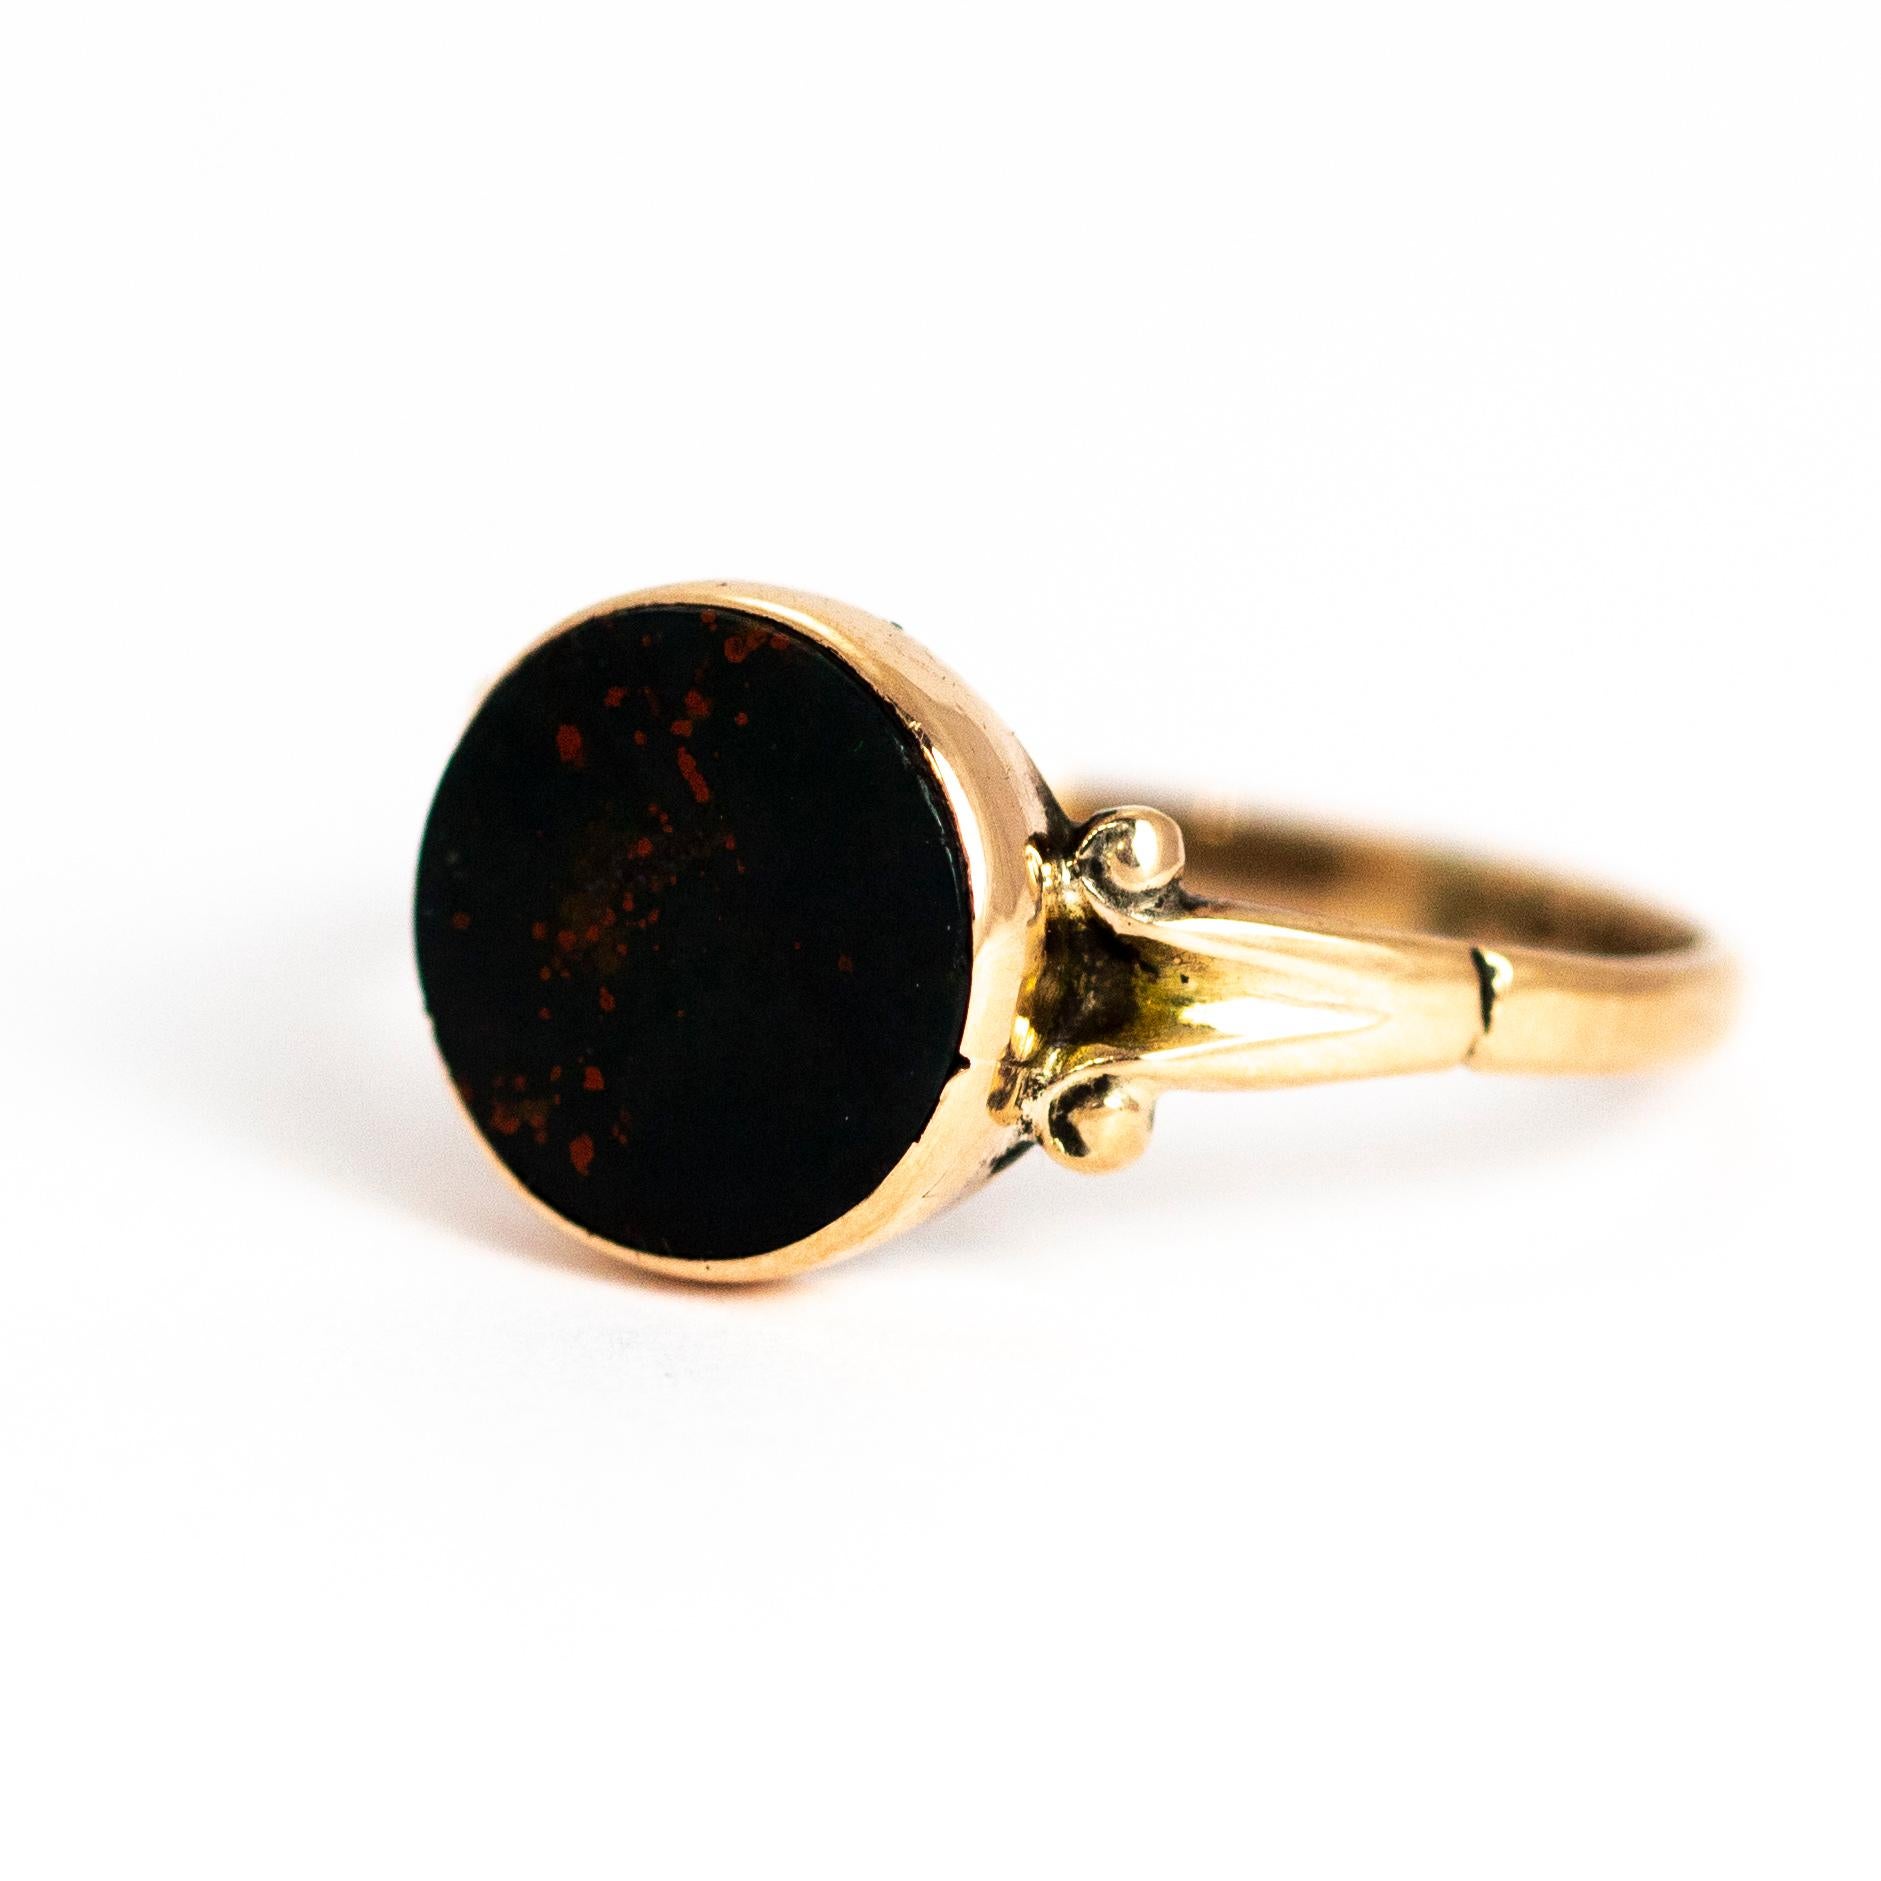 This Victorian piece hold a beautifully simple circular bloodstone set in a 9ct gold ring with scroll detailed shoulders. Made in Chester, United Kingdom.

Ring Size: Q or 8